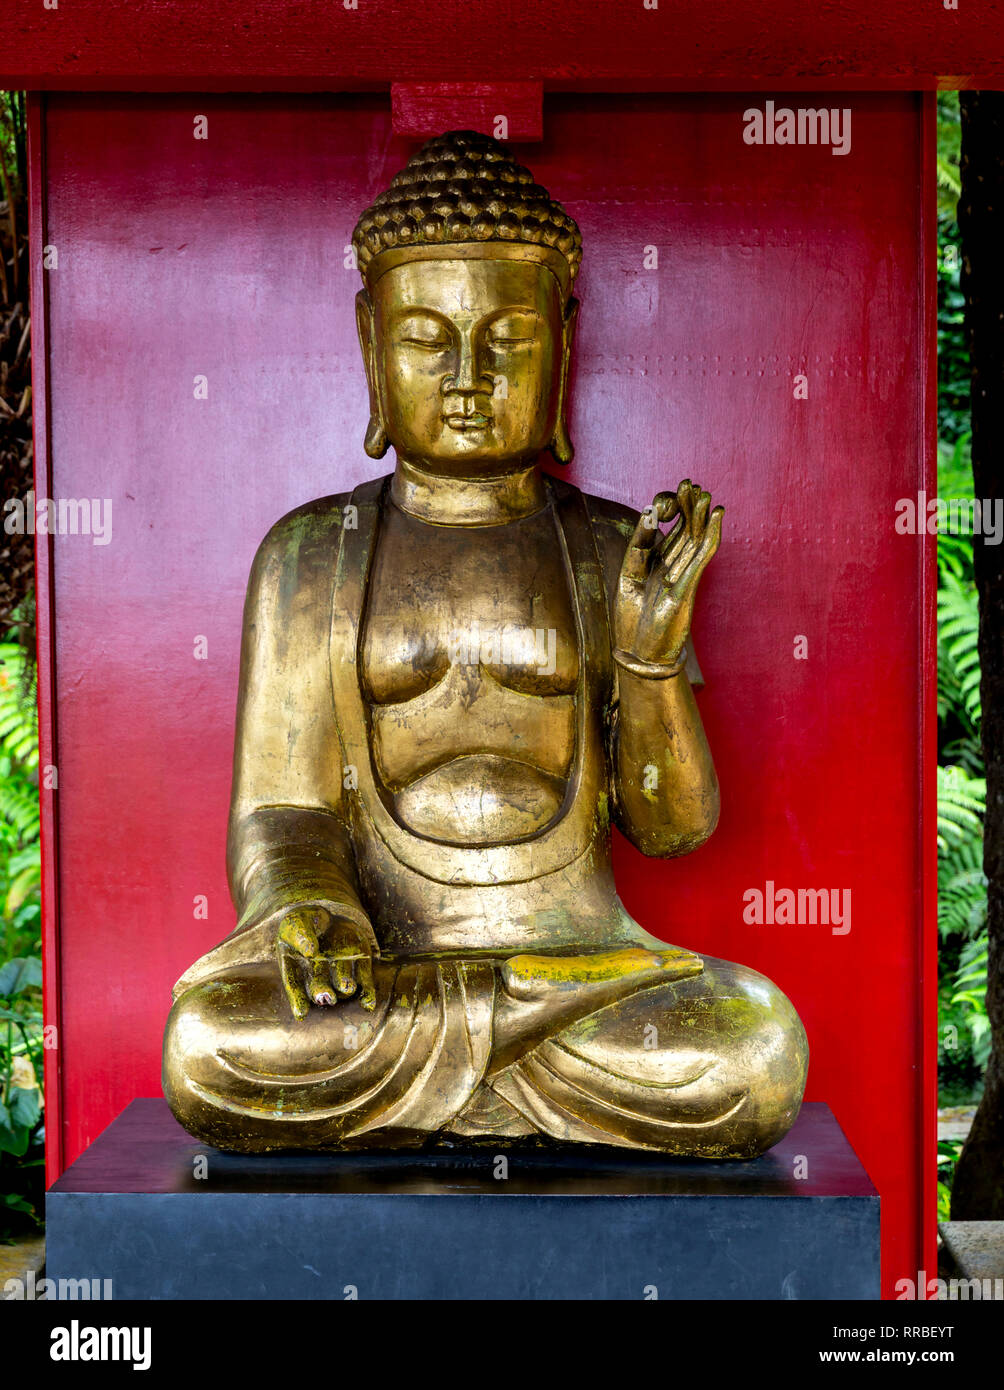 Golden Buddha statue in the Japanese garden, Monte Palace Tropical Gardens, Funchal, Madeira, Portugal. Stock Photo